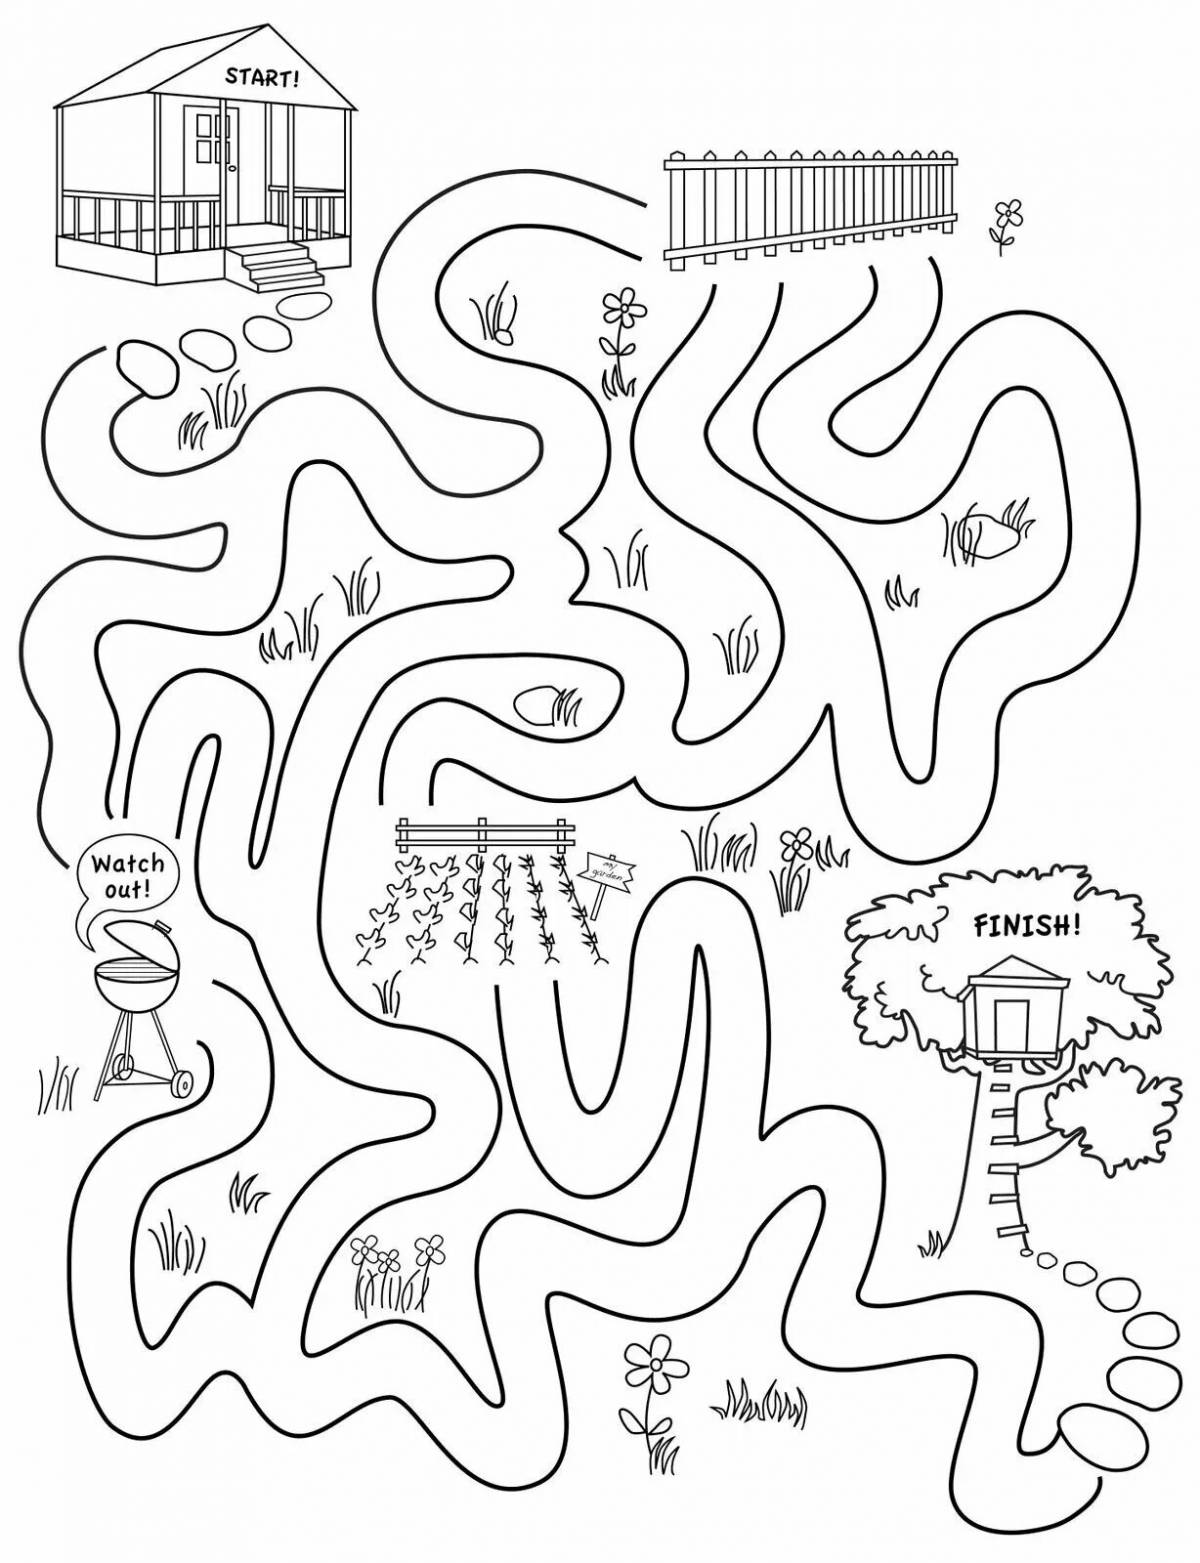 Maze for children 3 4 years old #6